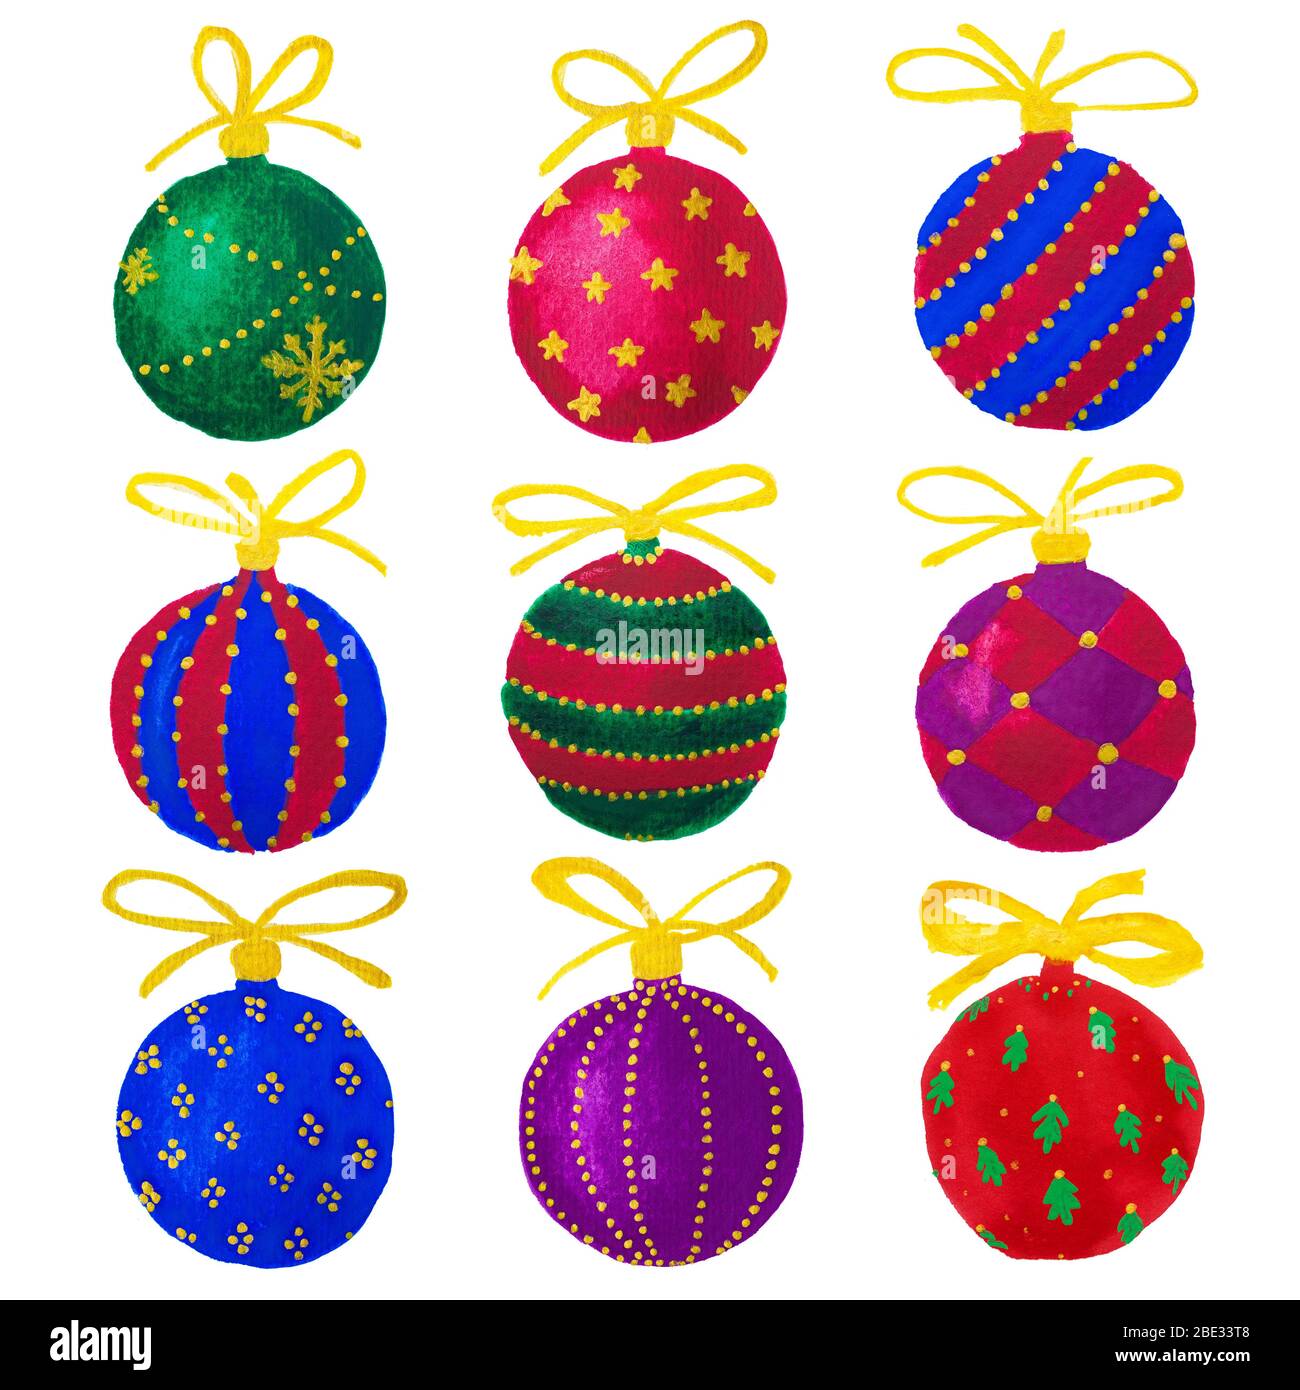 Watercolor hand drawn drawing of colorful Christmas baubles spheres balls set collection, isolated Stock Photo